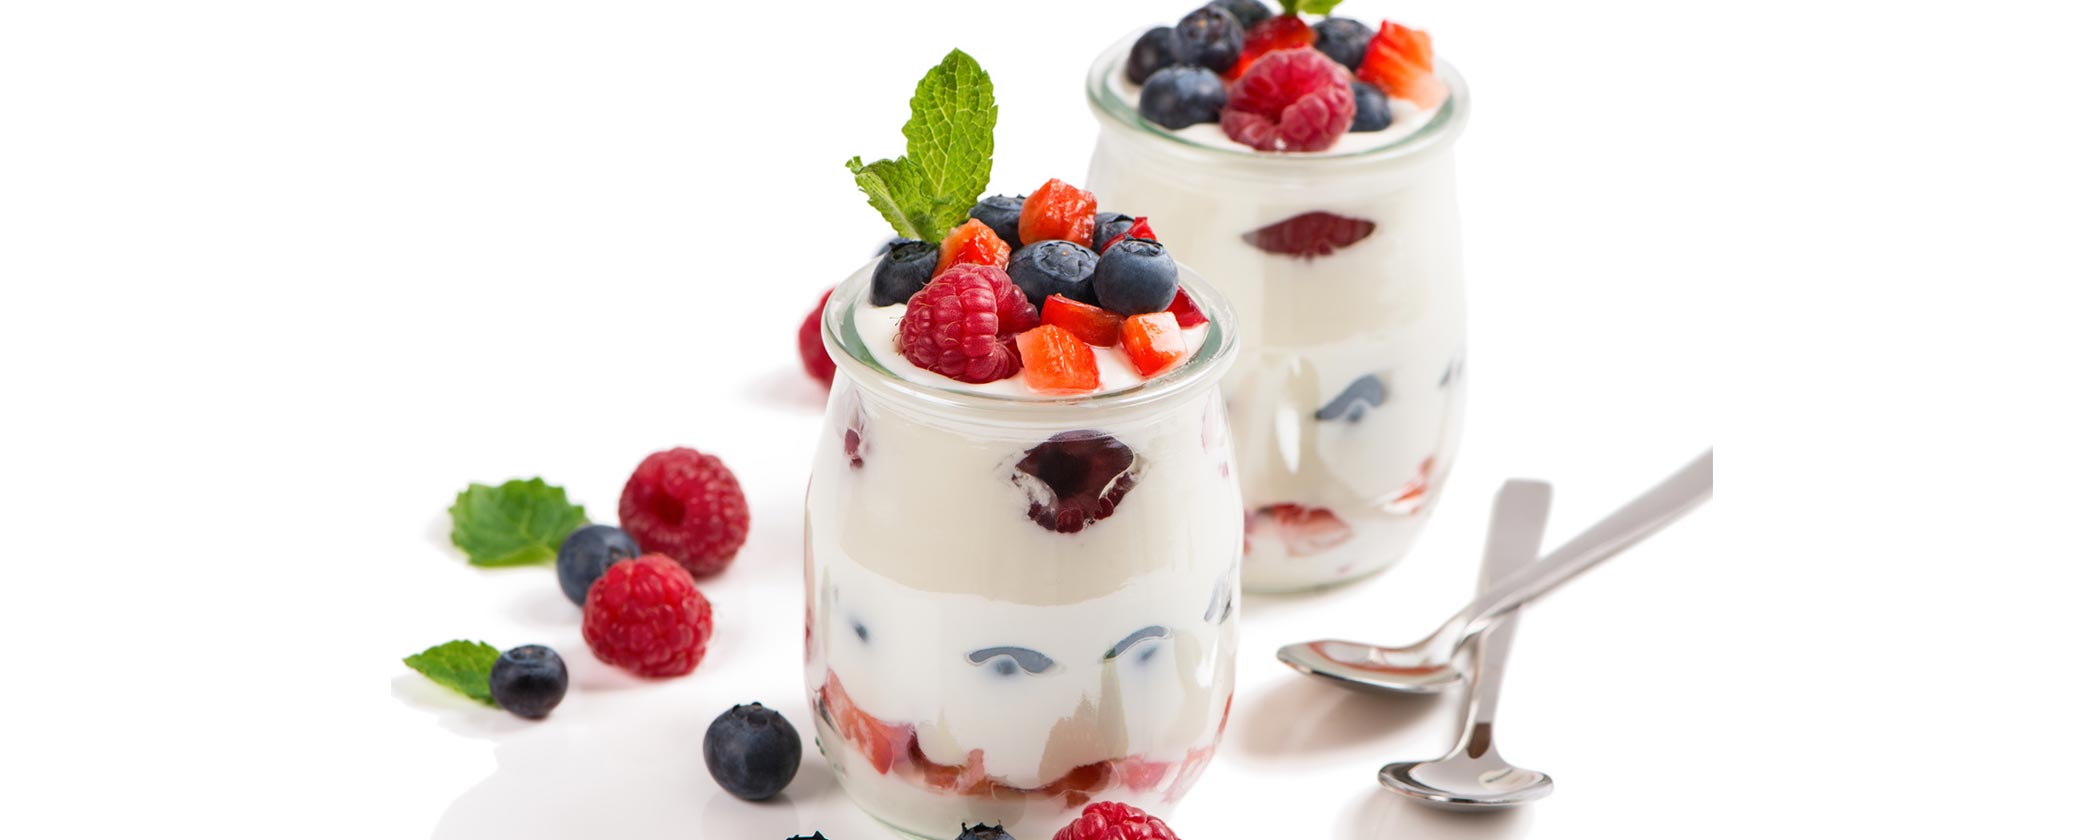 Two yogurt fruit parfaits with raspberries and blueberries in clear jars